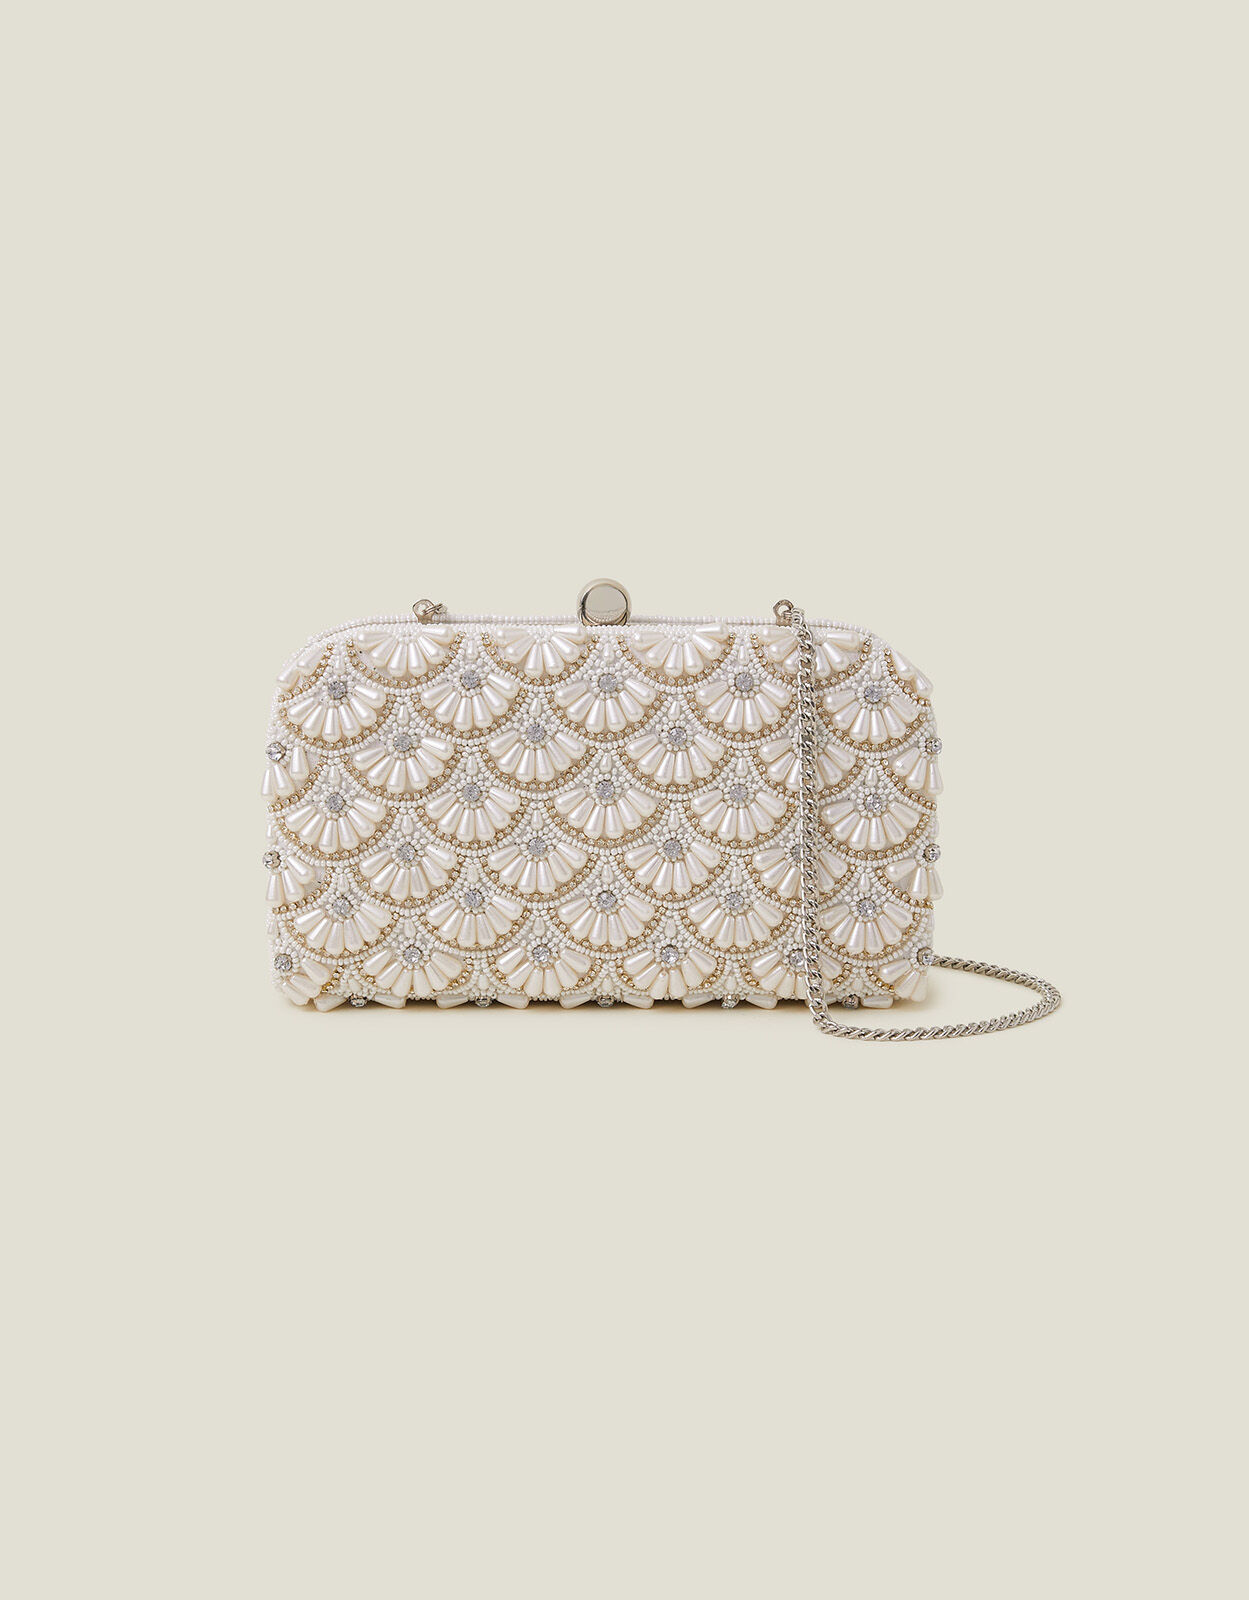 Clutch Bags | Gold, Silver & Sparkly Clutch Bags | Accessorize UK